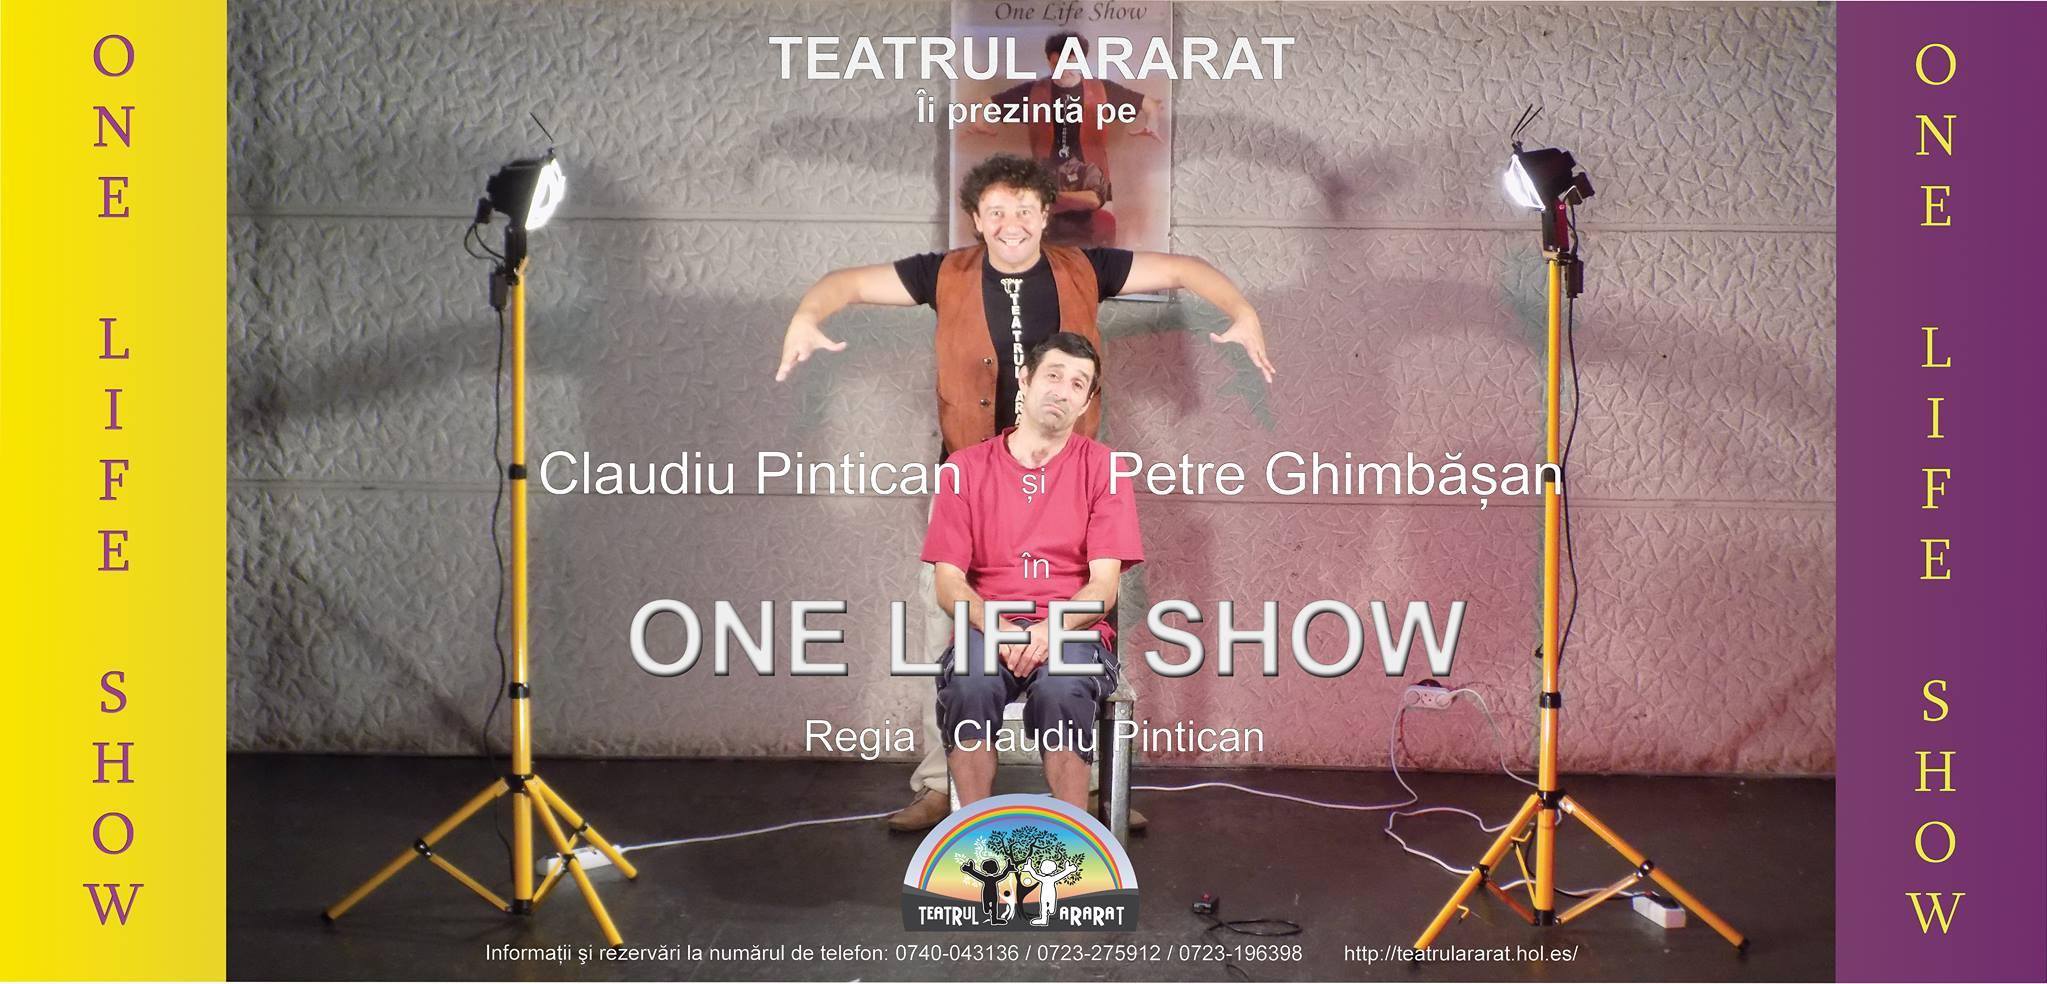 One life show